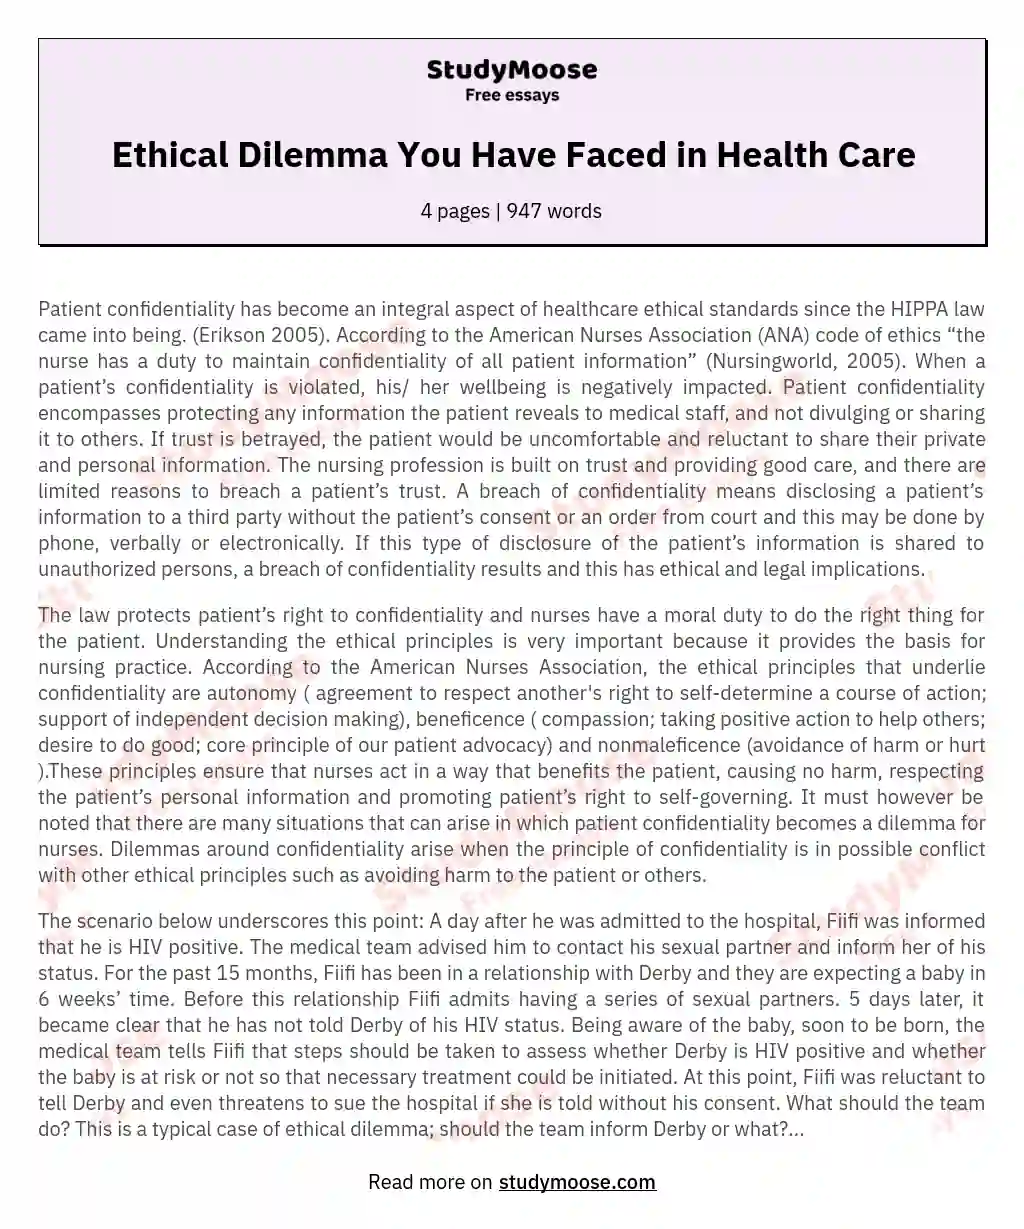 Ethical Dilemma You Have Faced in Health Care essay